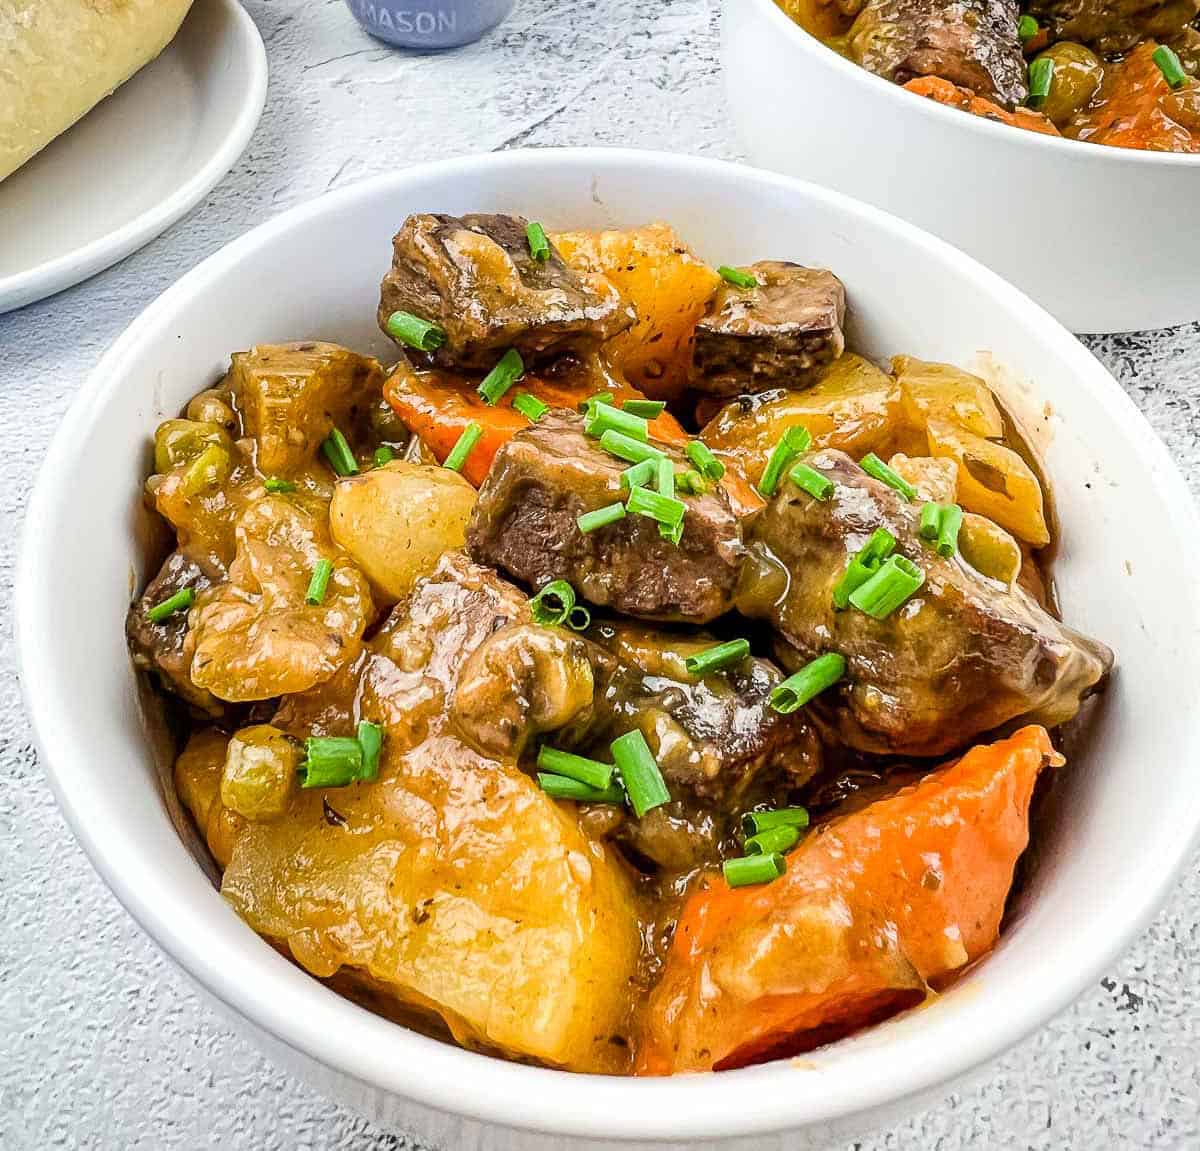 A smoked beef stew recipe with carrots and potatoes.